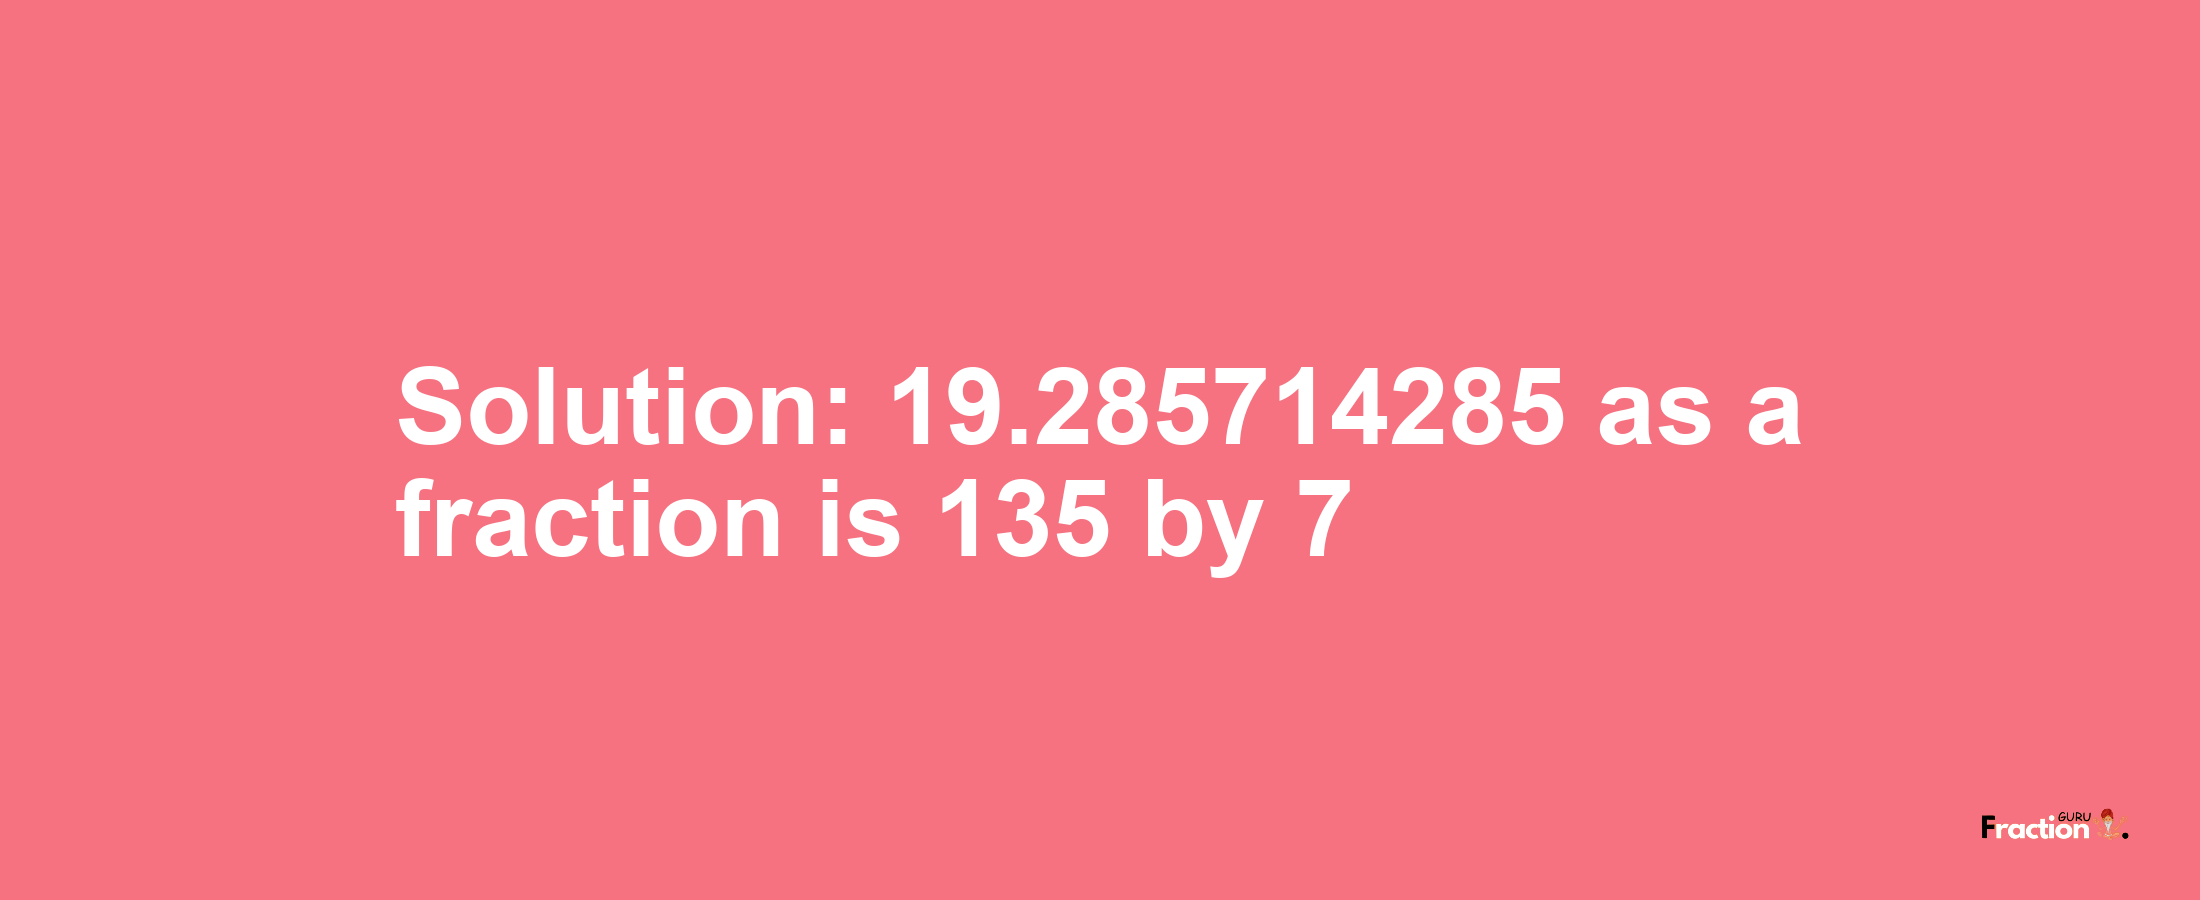 Solution:19.285714285 as a fraction is 135/7